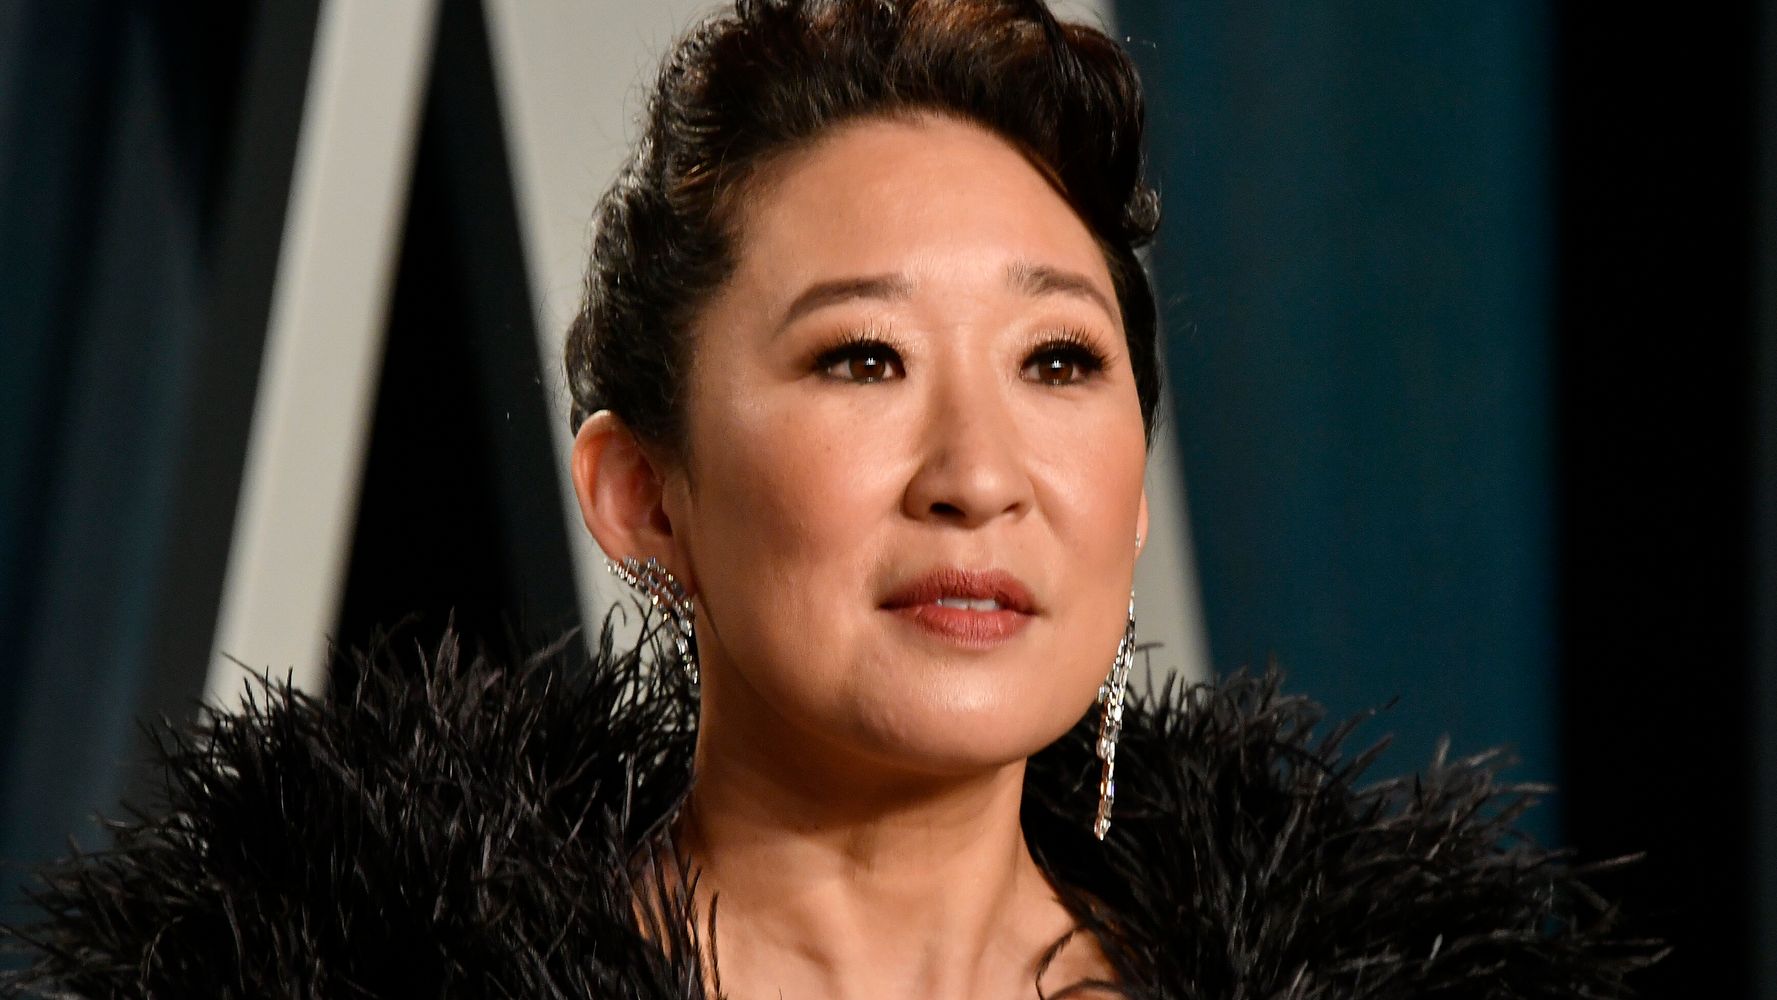 Sandra Oh asks to end anti-Asian hatred in a powerful speech: ‘I Am Proud To Be Asian’